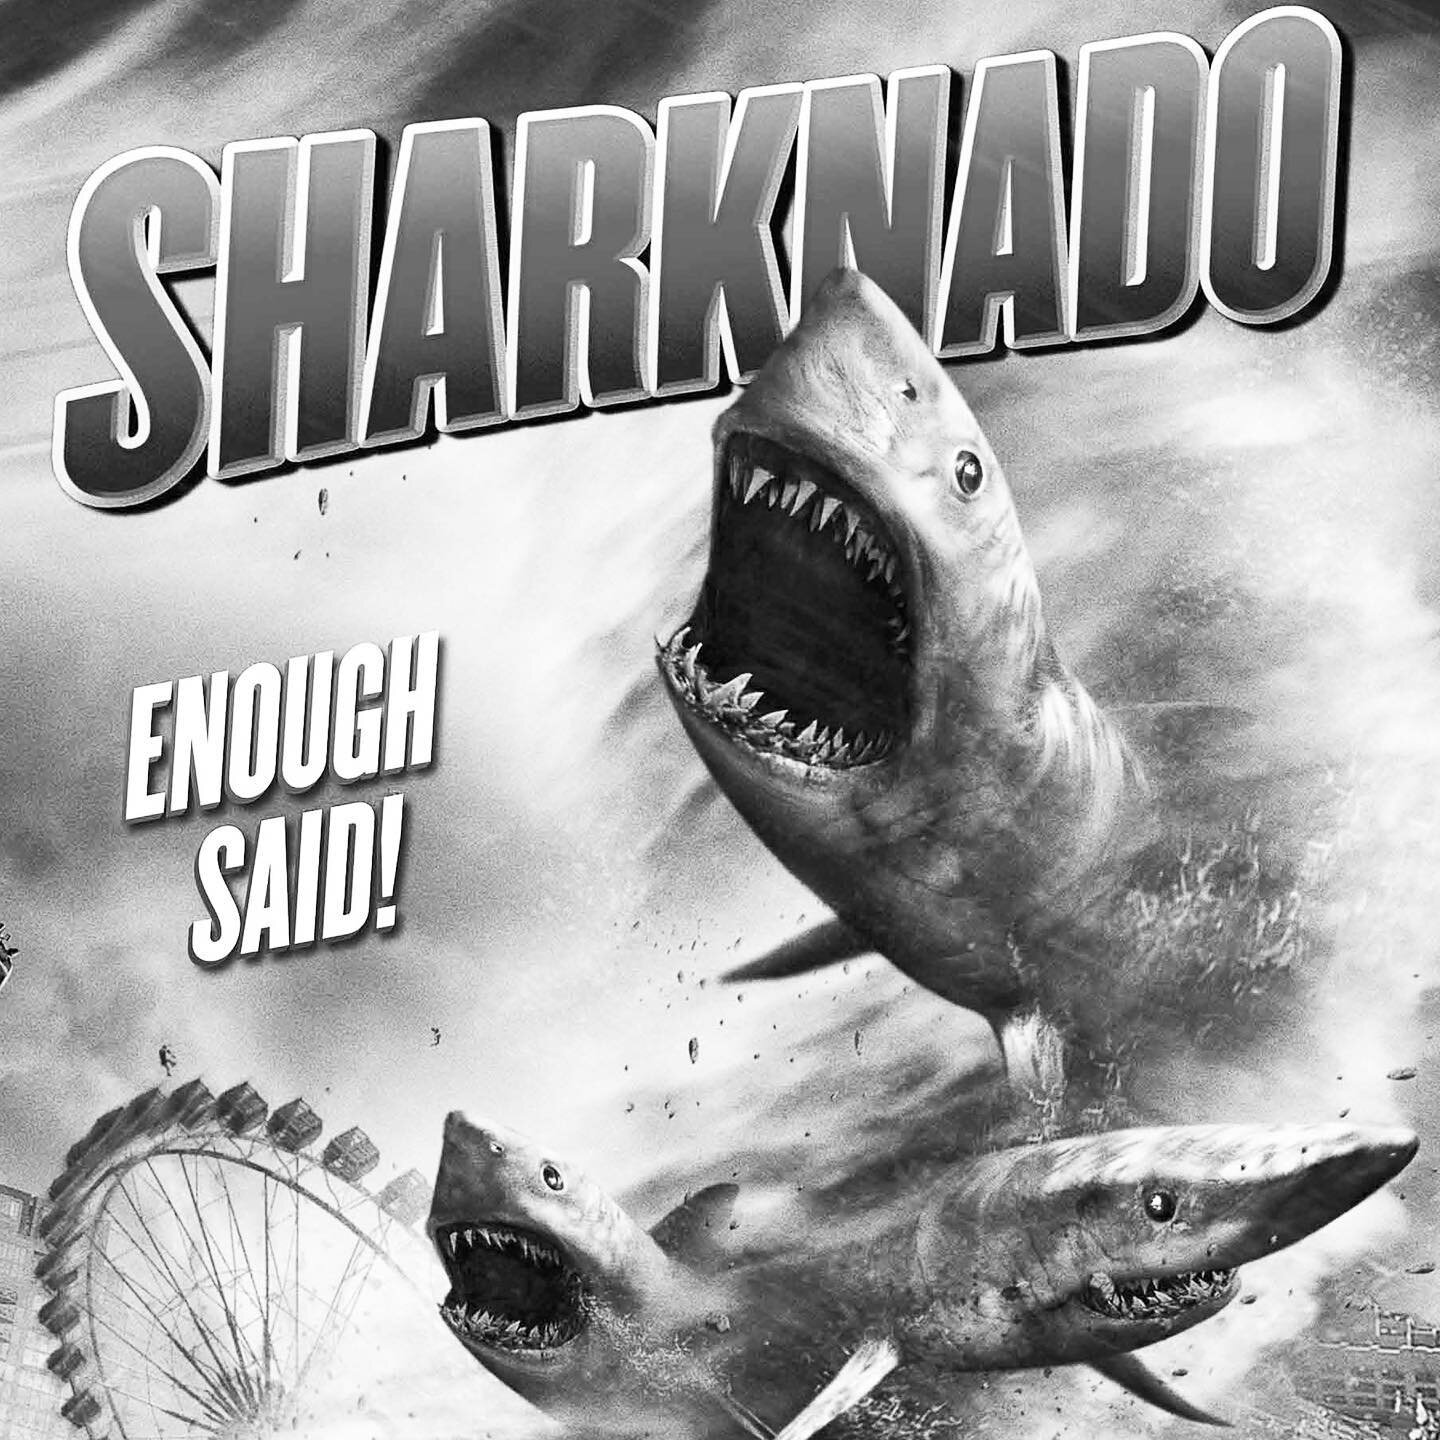 Patreon members! @lucas_dakota asked for it so you&rsquo;re gettin it. The boys have watched and reviewed sharknado and oooooh wee is it something else. Now streaming on Patreon!
.
.
.
.
.
.
#sharknado #sharkweek #podcast #mondaymorningmacabre #patre